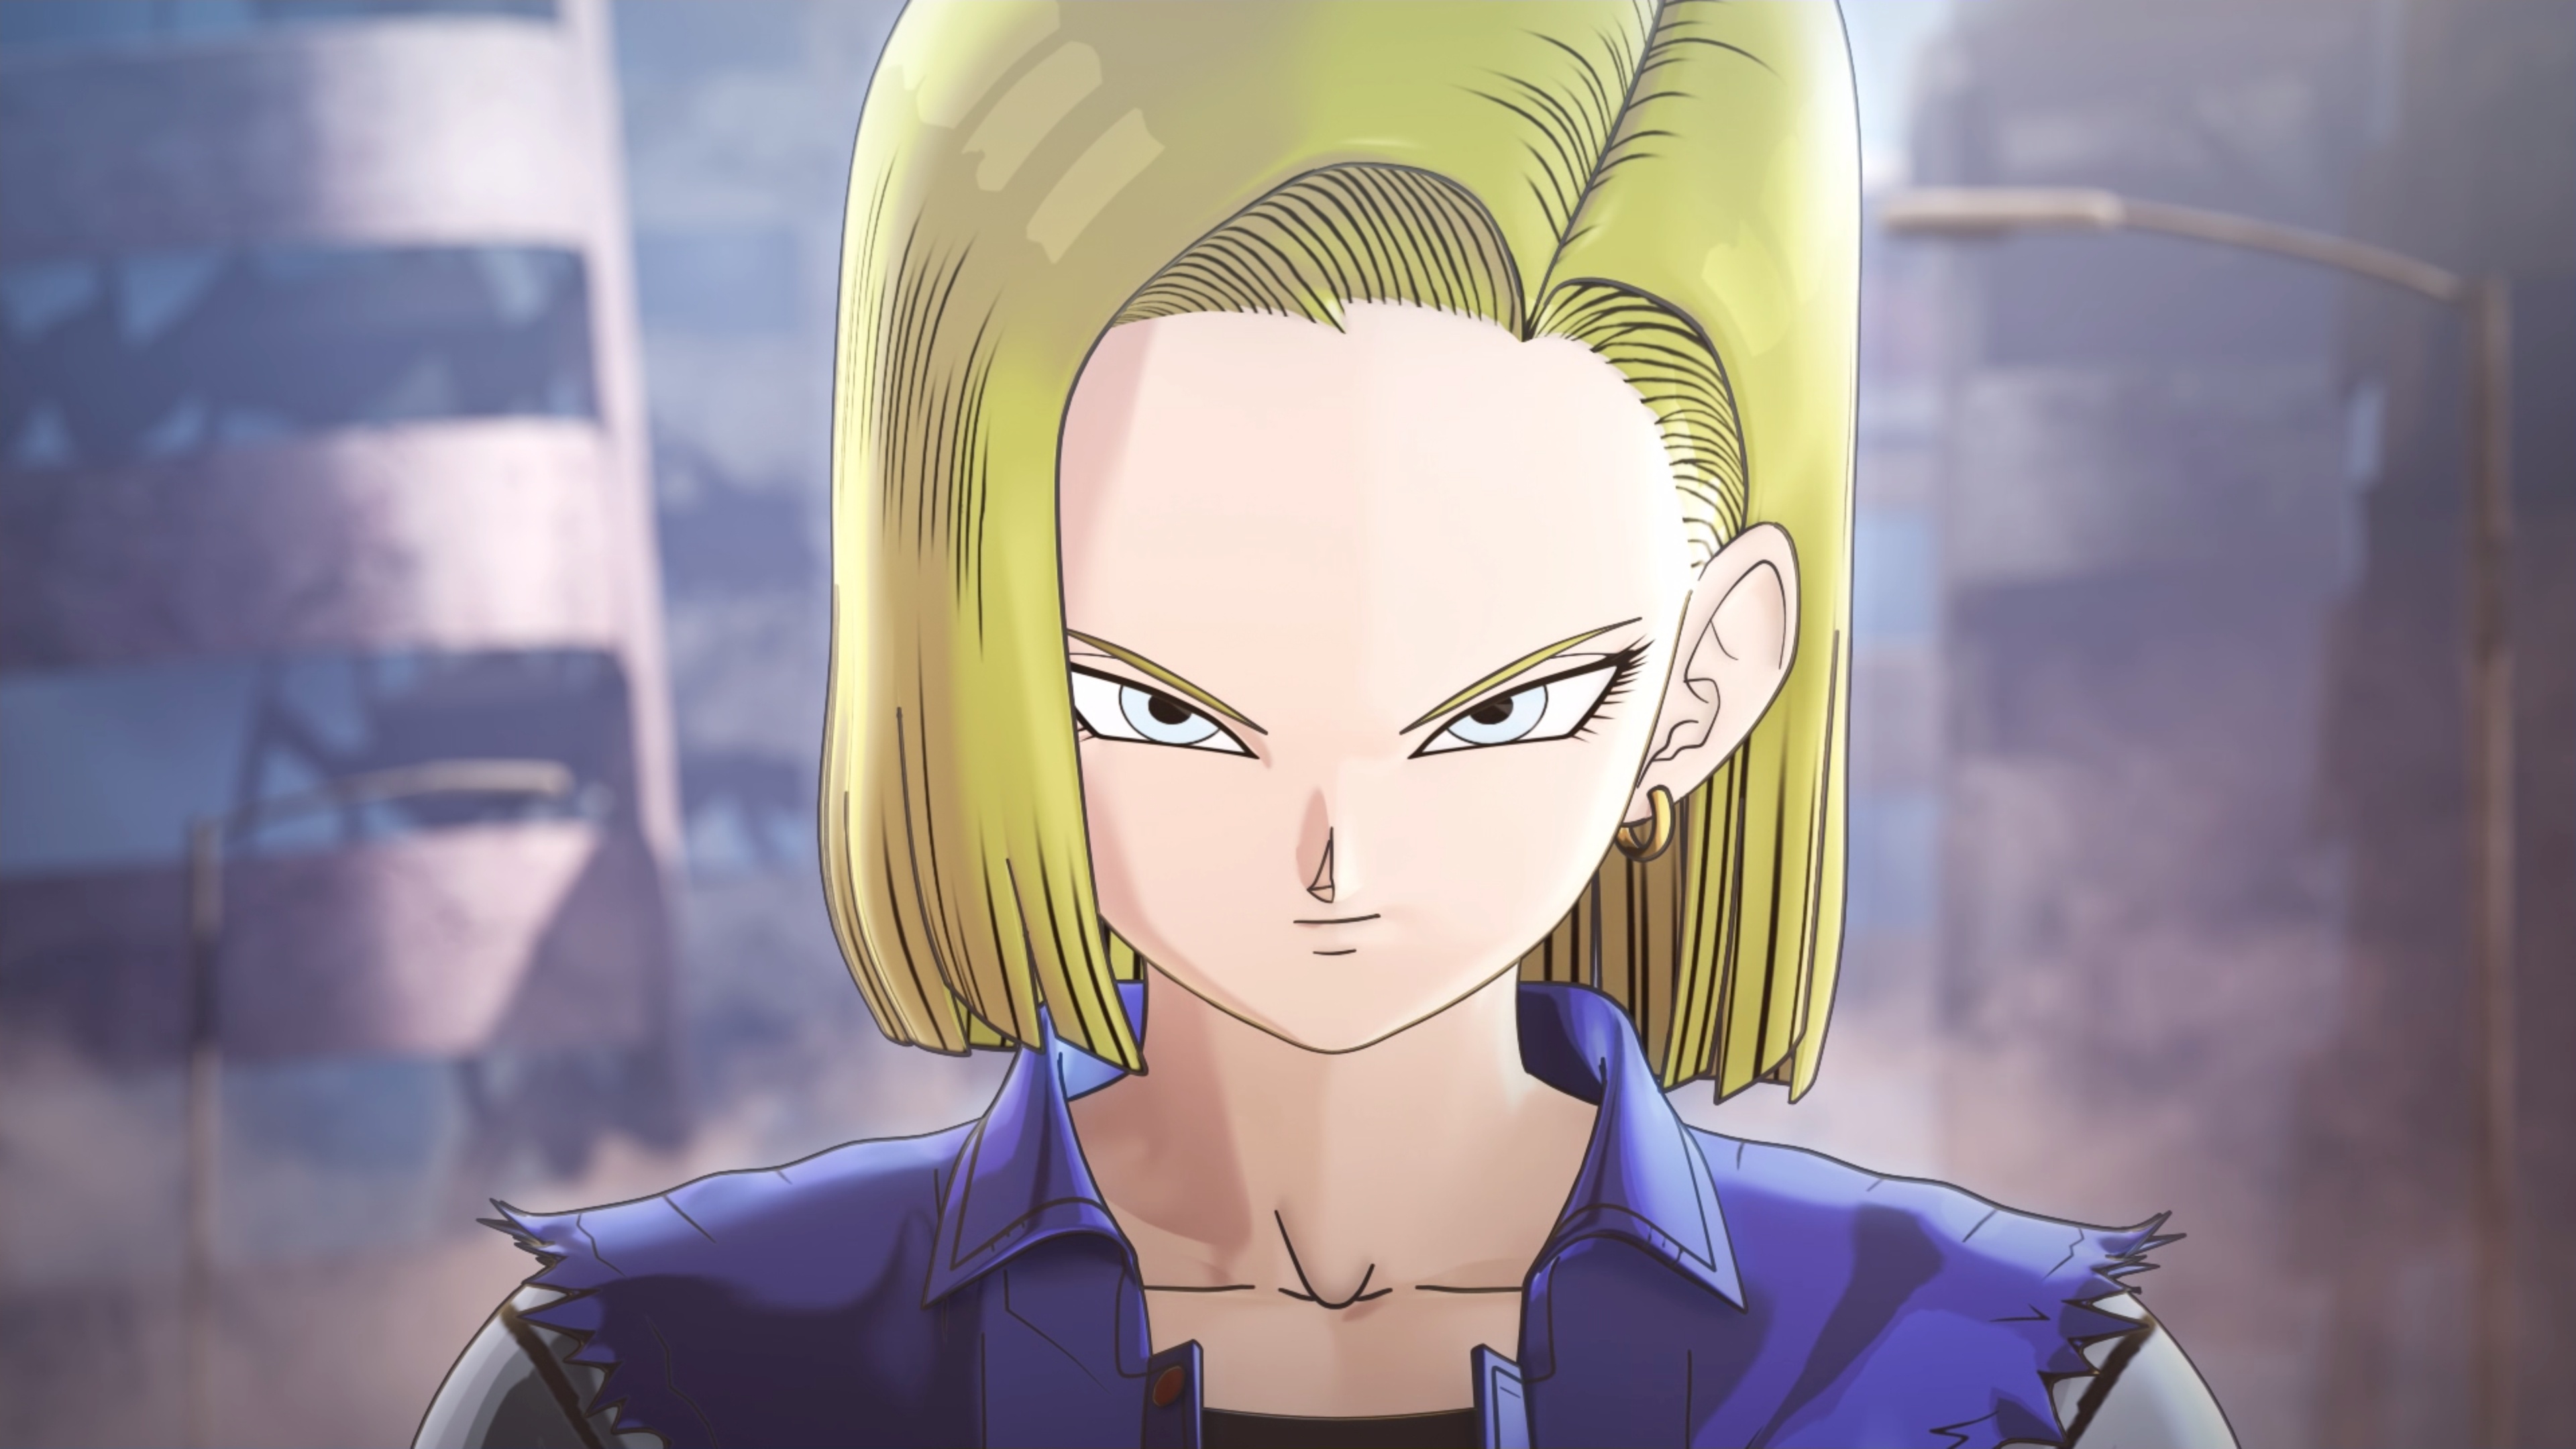 Android 18, Dragon Ball wallpapers, Fan creations, 3840x2160 4K Desktop